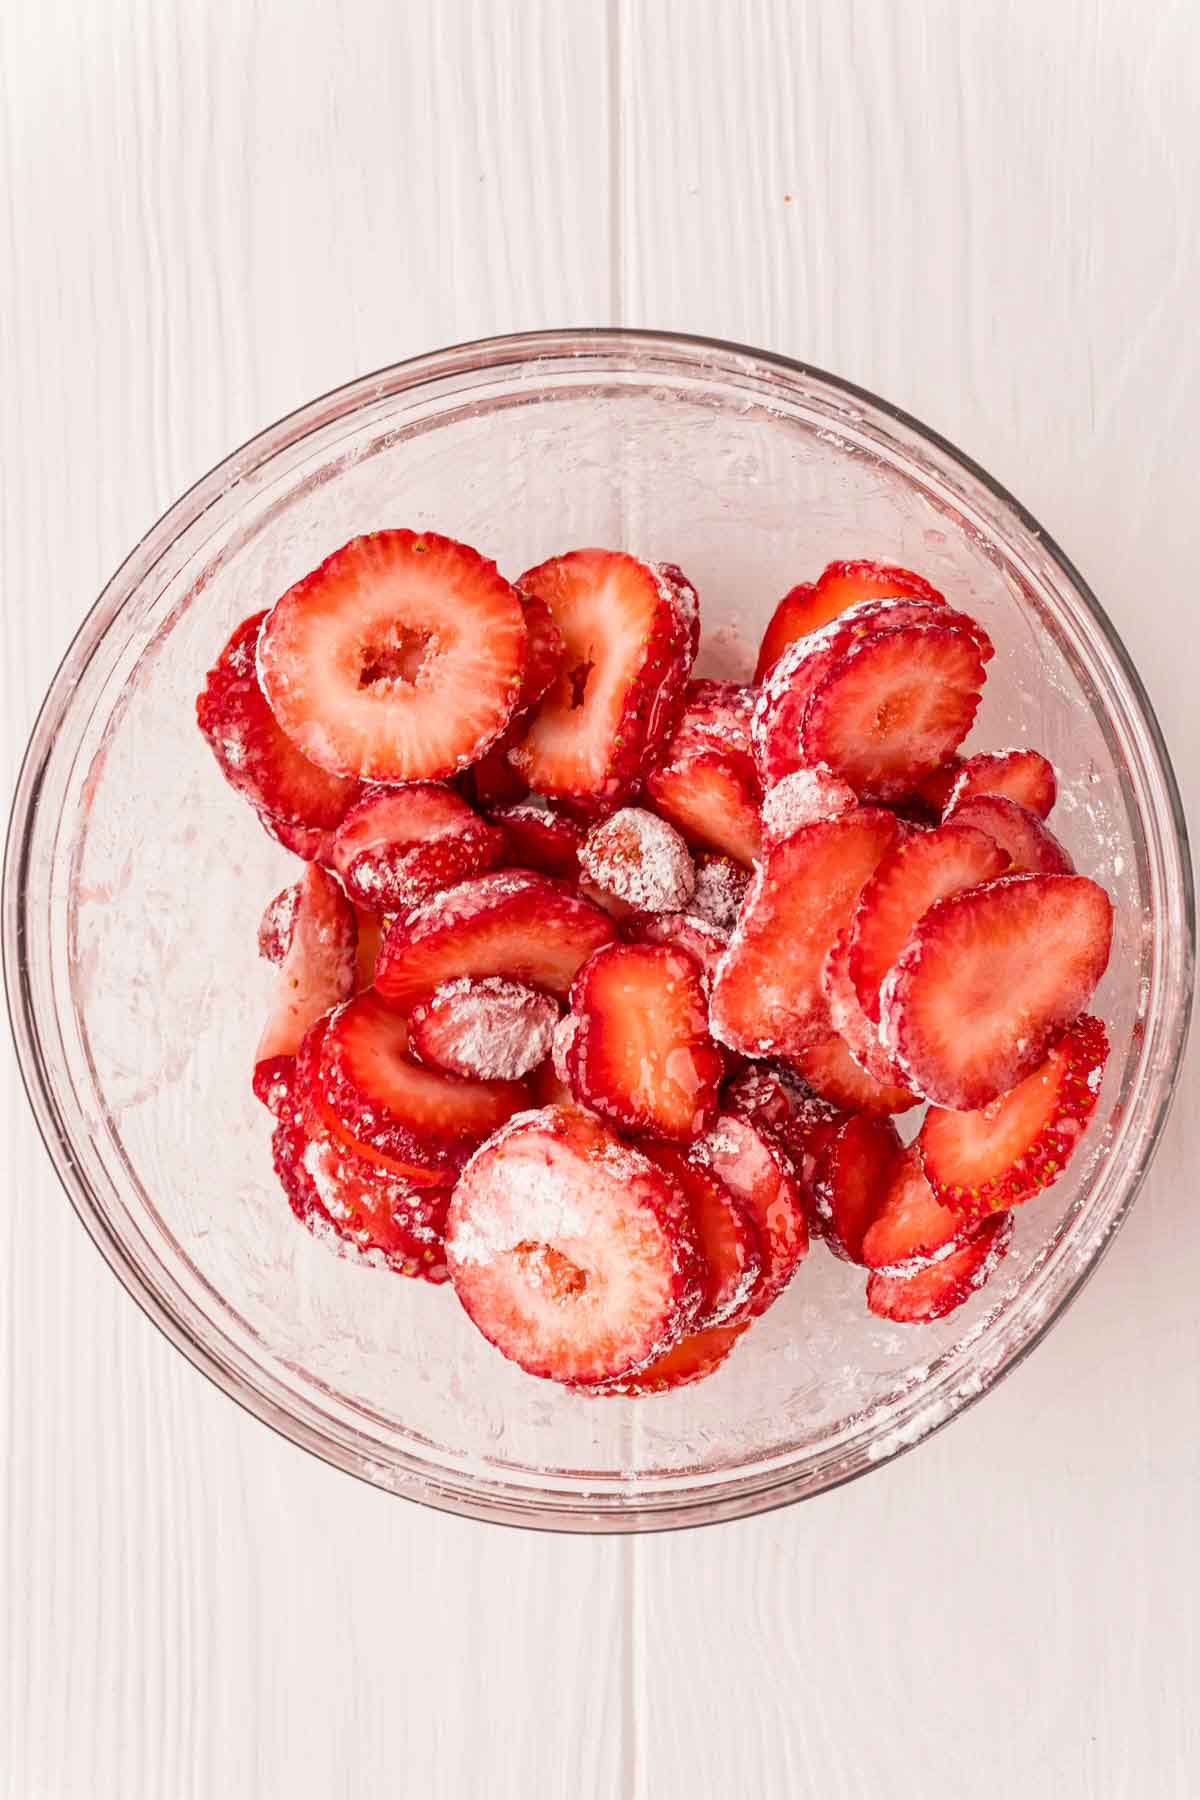 strawberries and sugar in a glass bowl